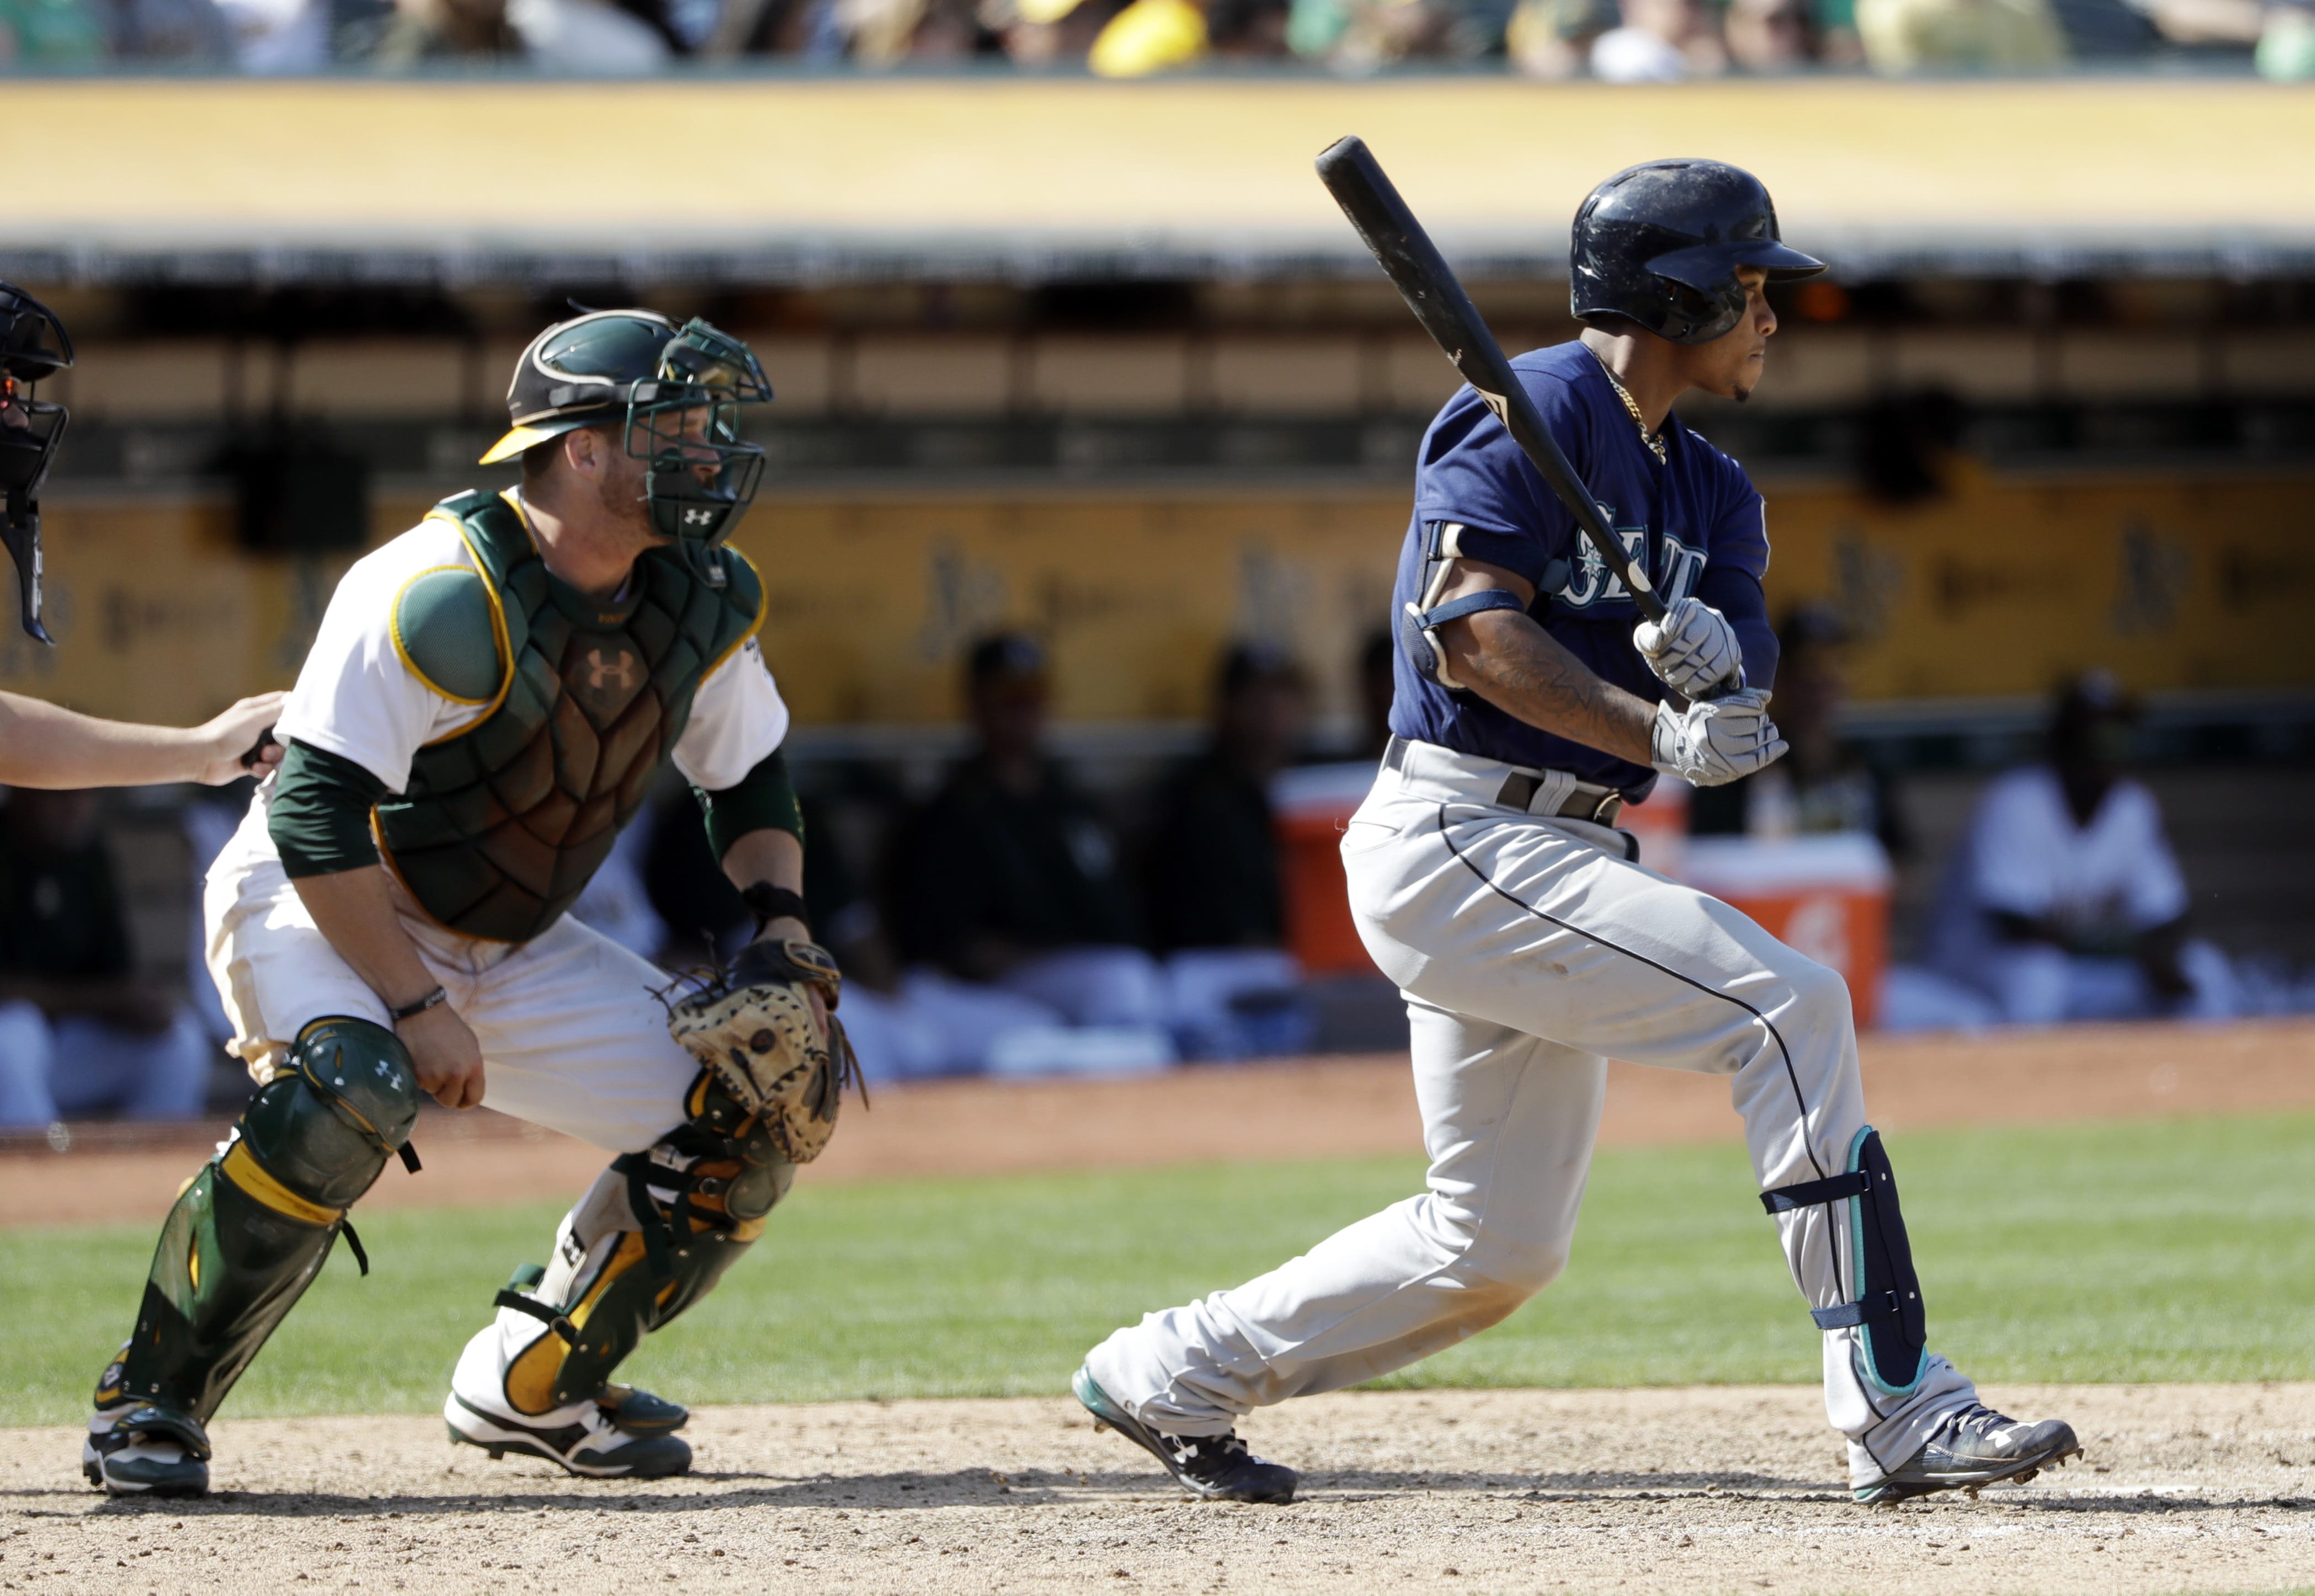 Seattle Mariners' Ketel Marte, right, drives in a run with a single during the ninth inning of a baseball game against the Oakland Athletics, Sunday, Sept. 11, 2016, in Oakland, Calif.